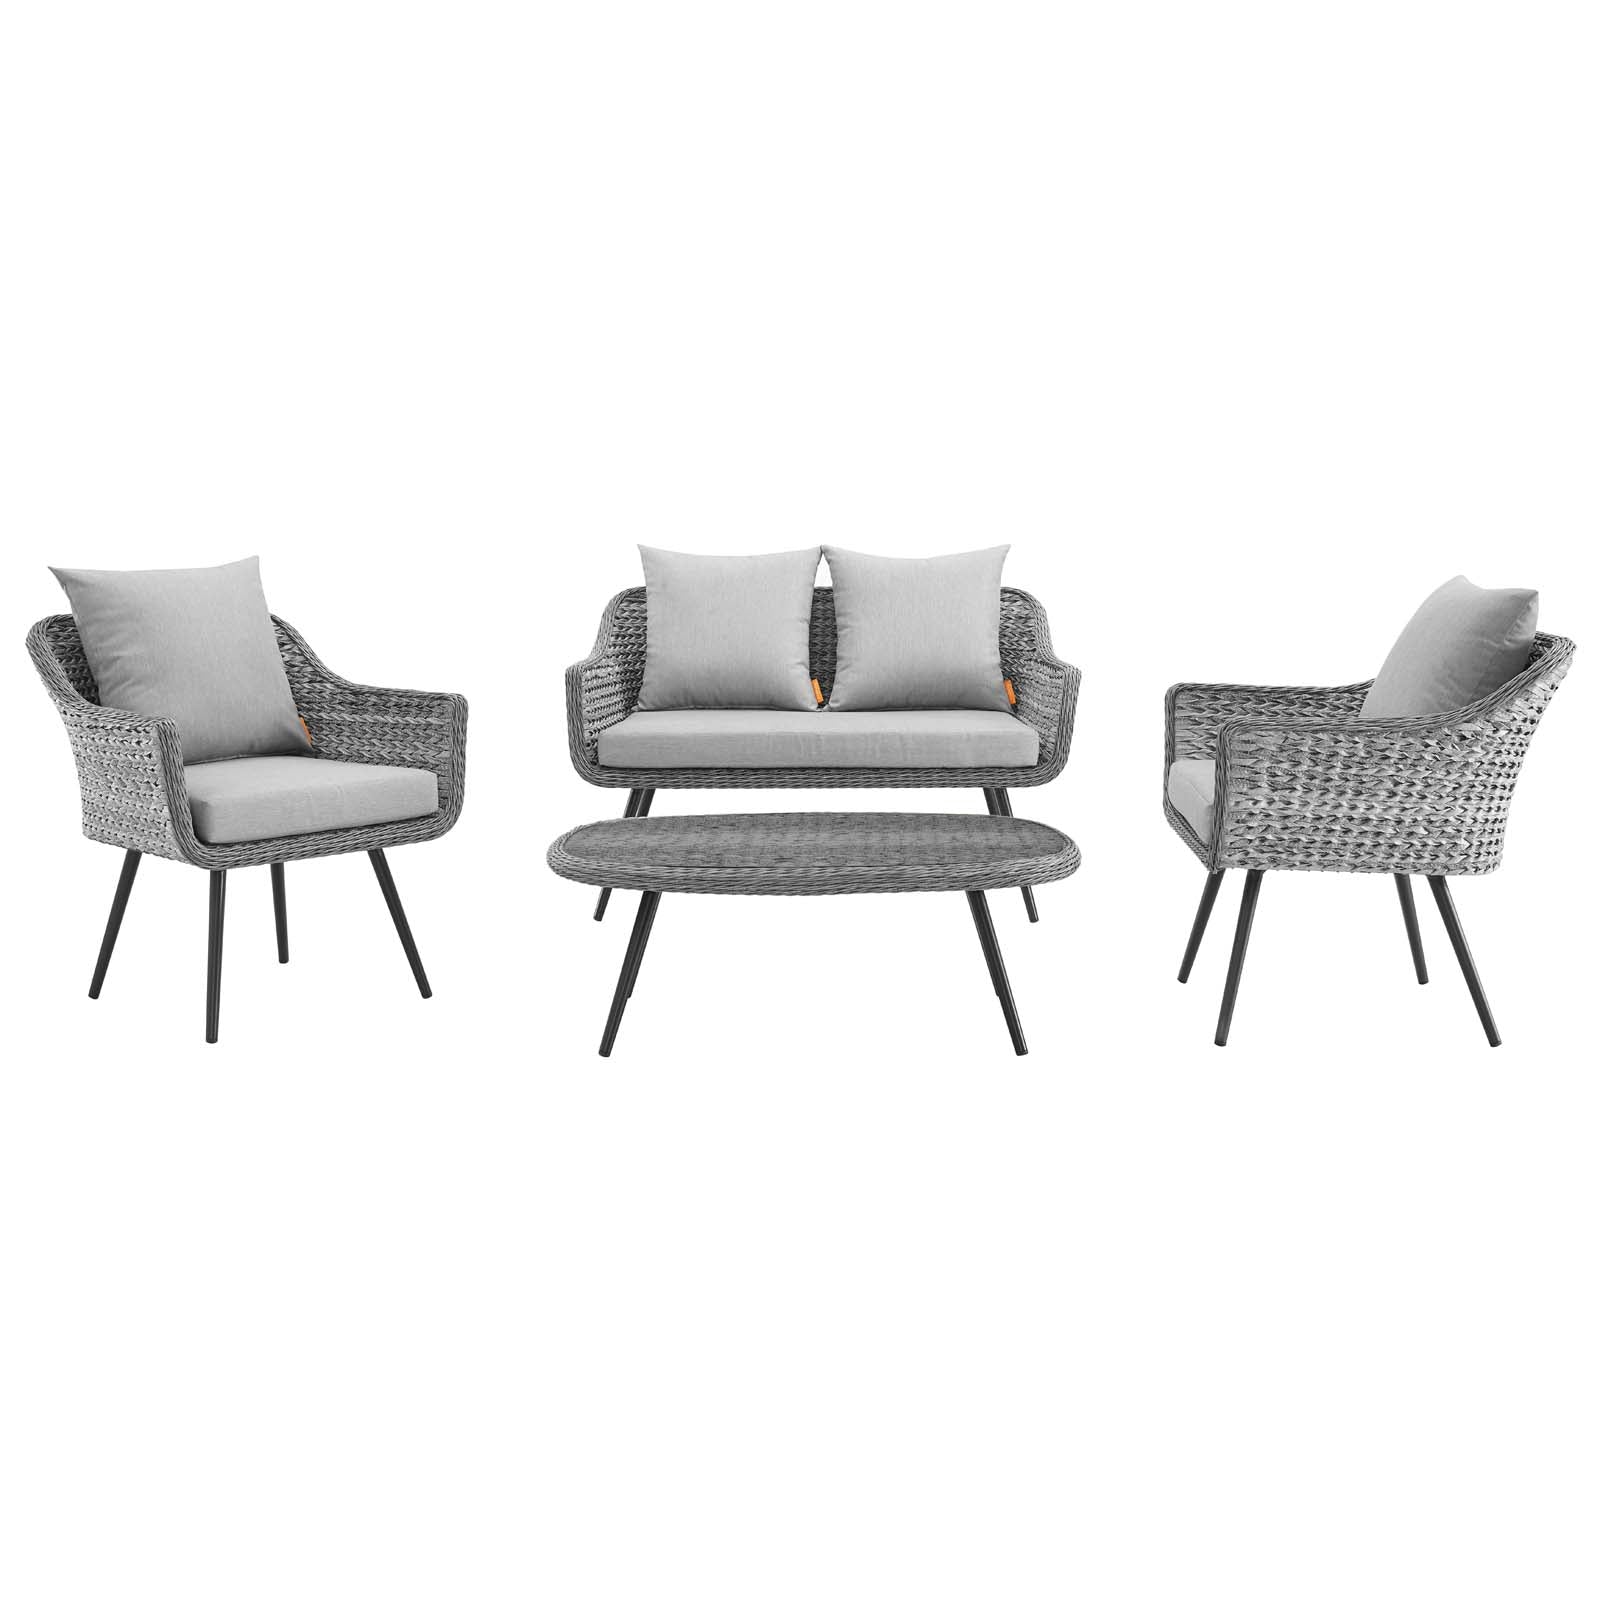 Endeavor 4 Piece Outdoor Patio Wicker Rattan Sectional Sofa Set-Outdoor Set-Modway-Wall2Wall Furnishings